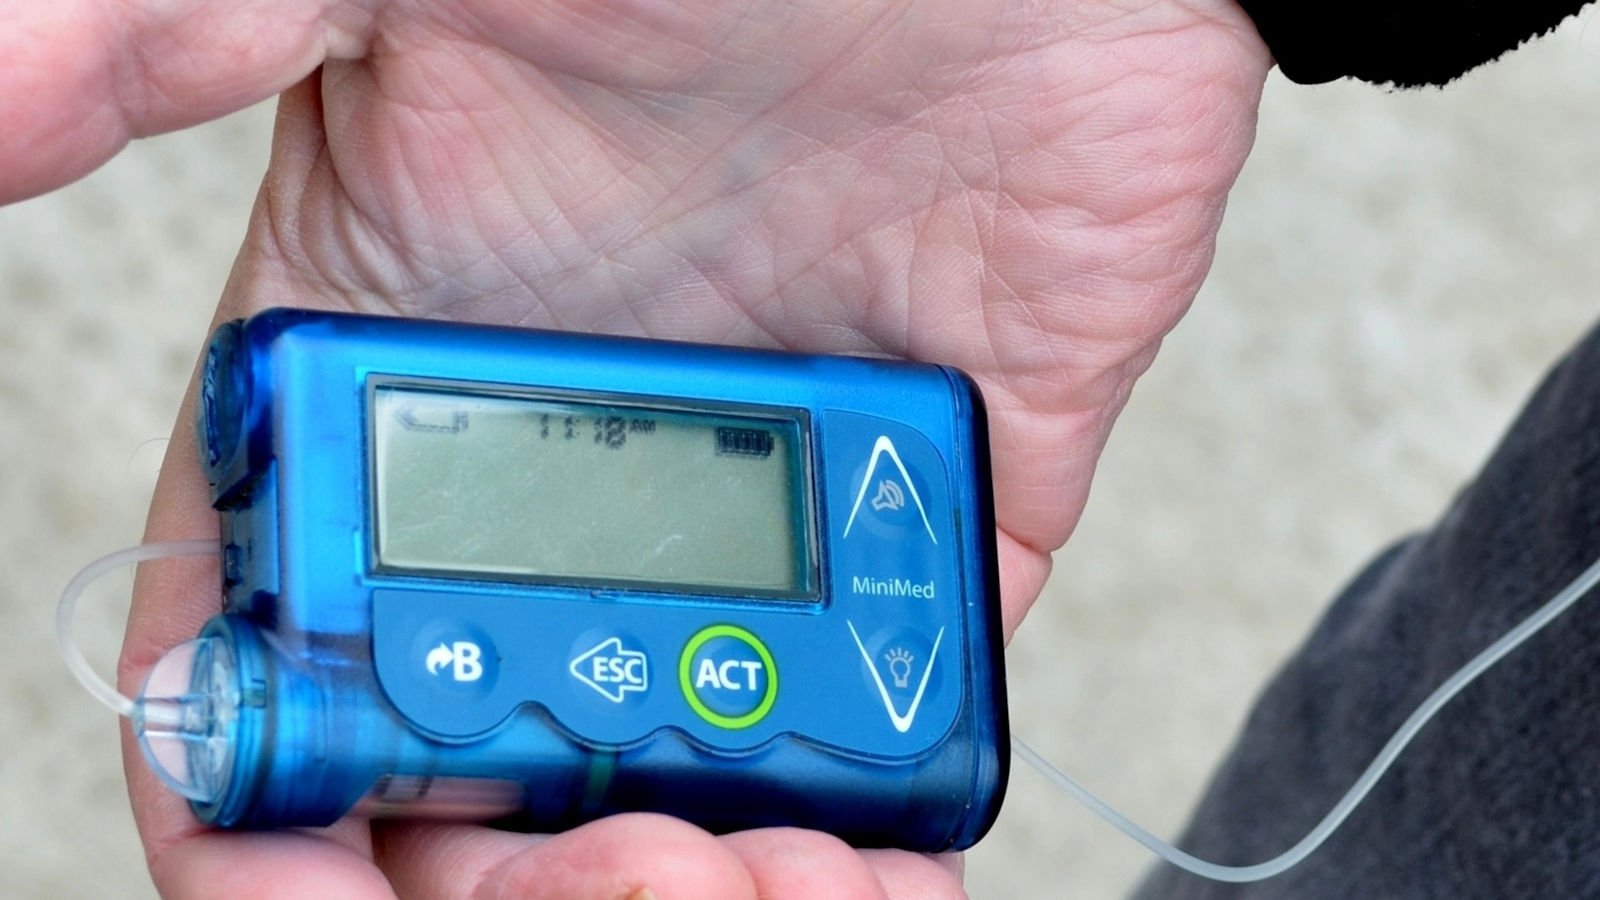 Medtronic urgently recalls insulin pump controllers over hacking